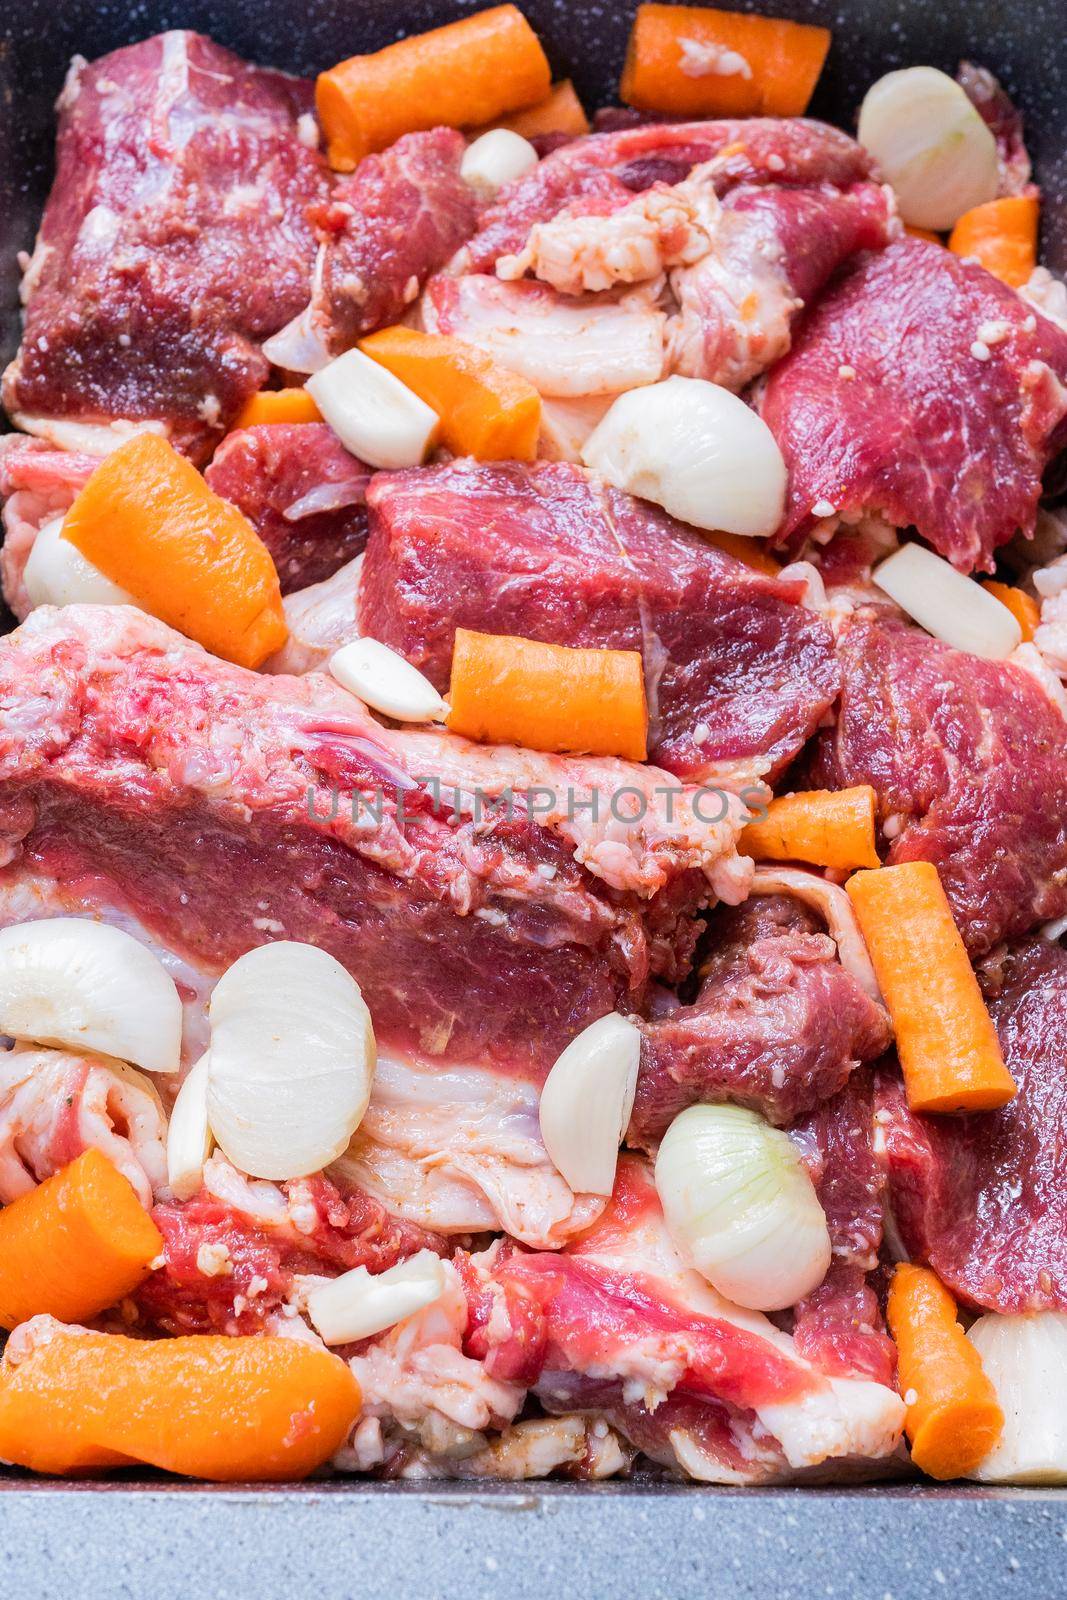 lamb meat on a baking sheet marinated with spices, vegetable oil, carrots and onions ready for baking in the oven by olex